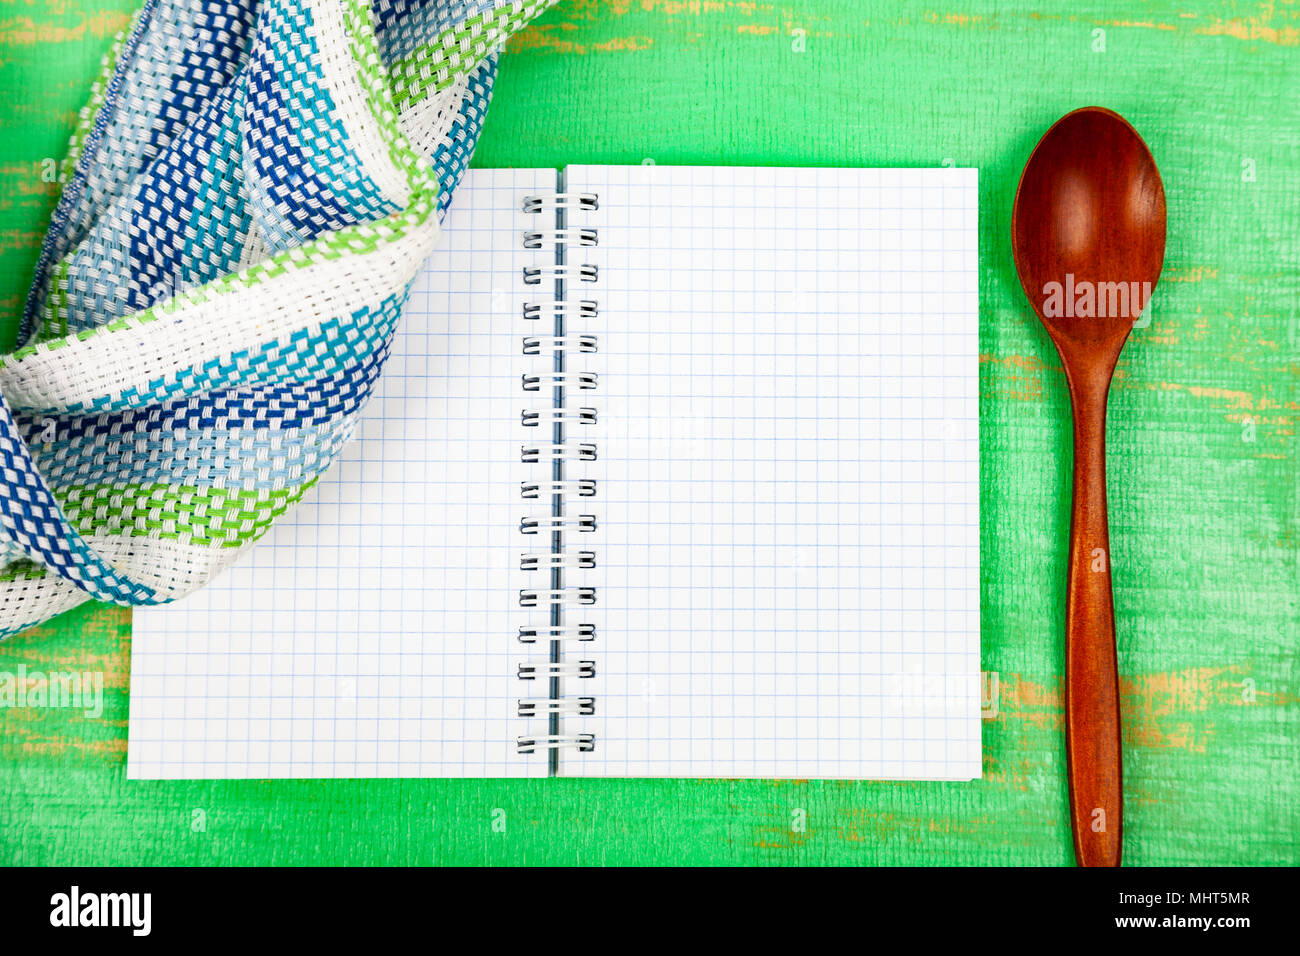 https://c8.alamy.com/comp/MHT5MR/culinary-recipe-towel-and-spoon-on-a-green-wooden-table-cooking-menu-MHT5MR.jpg